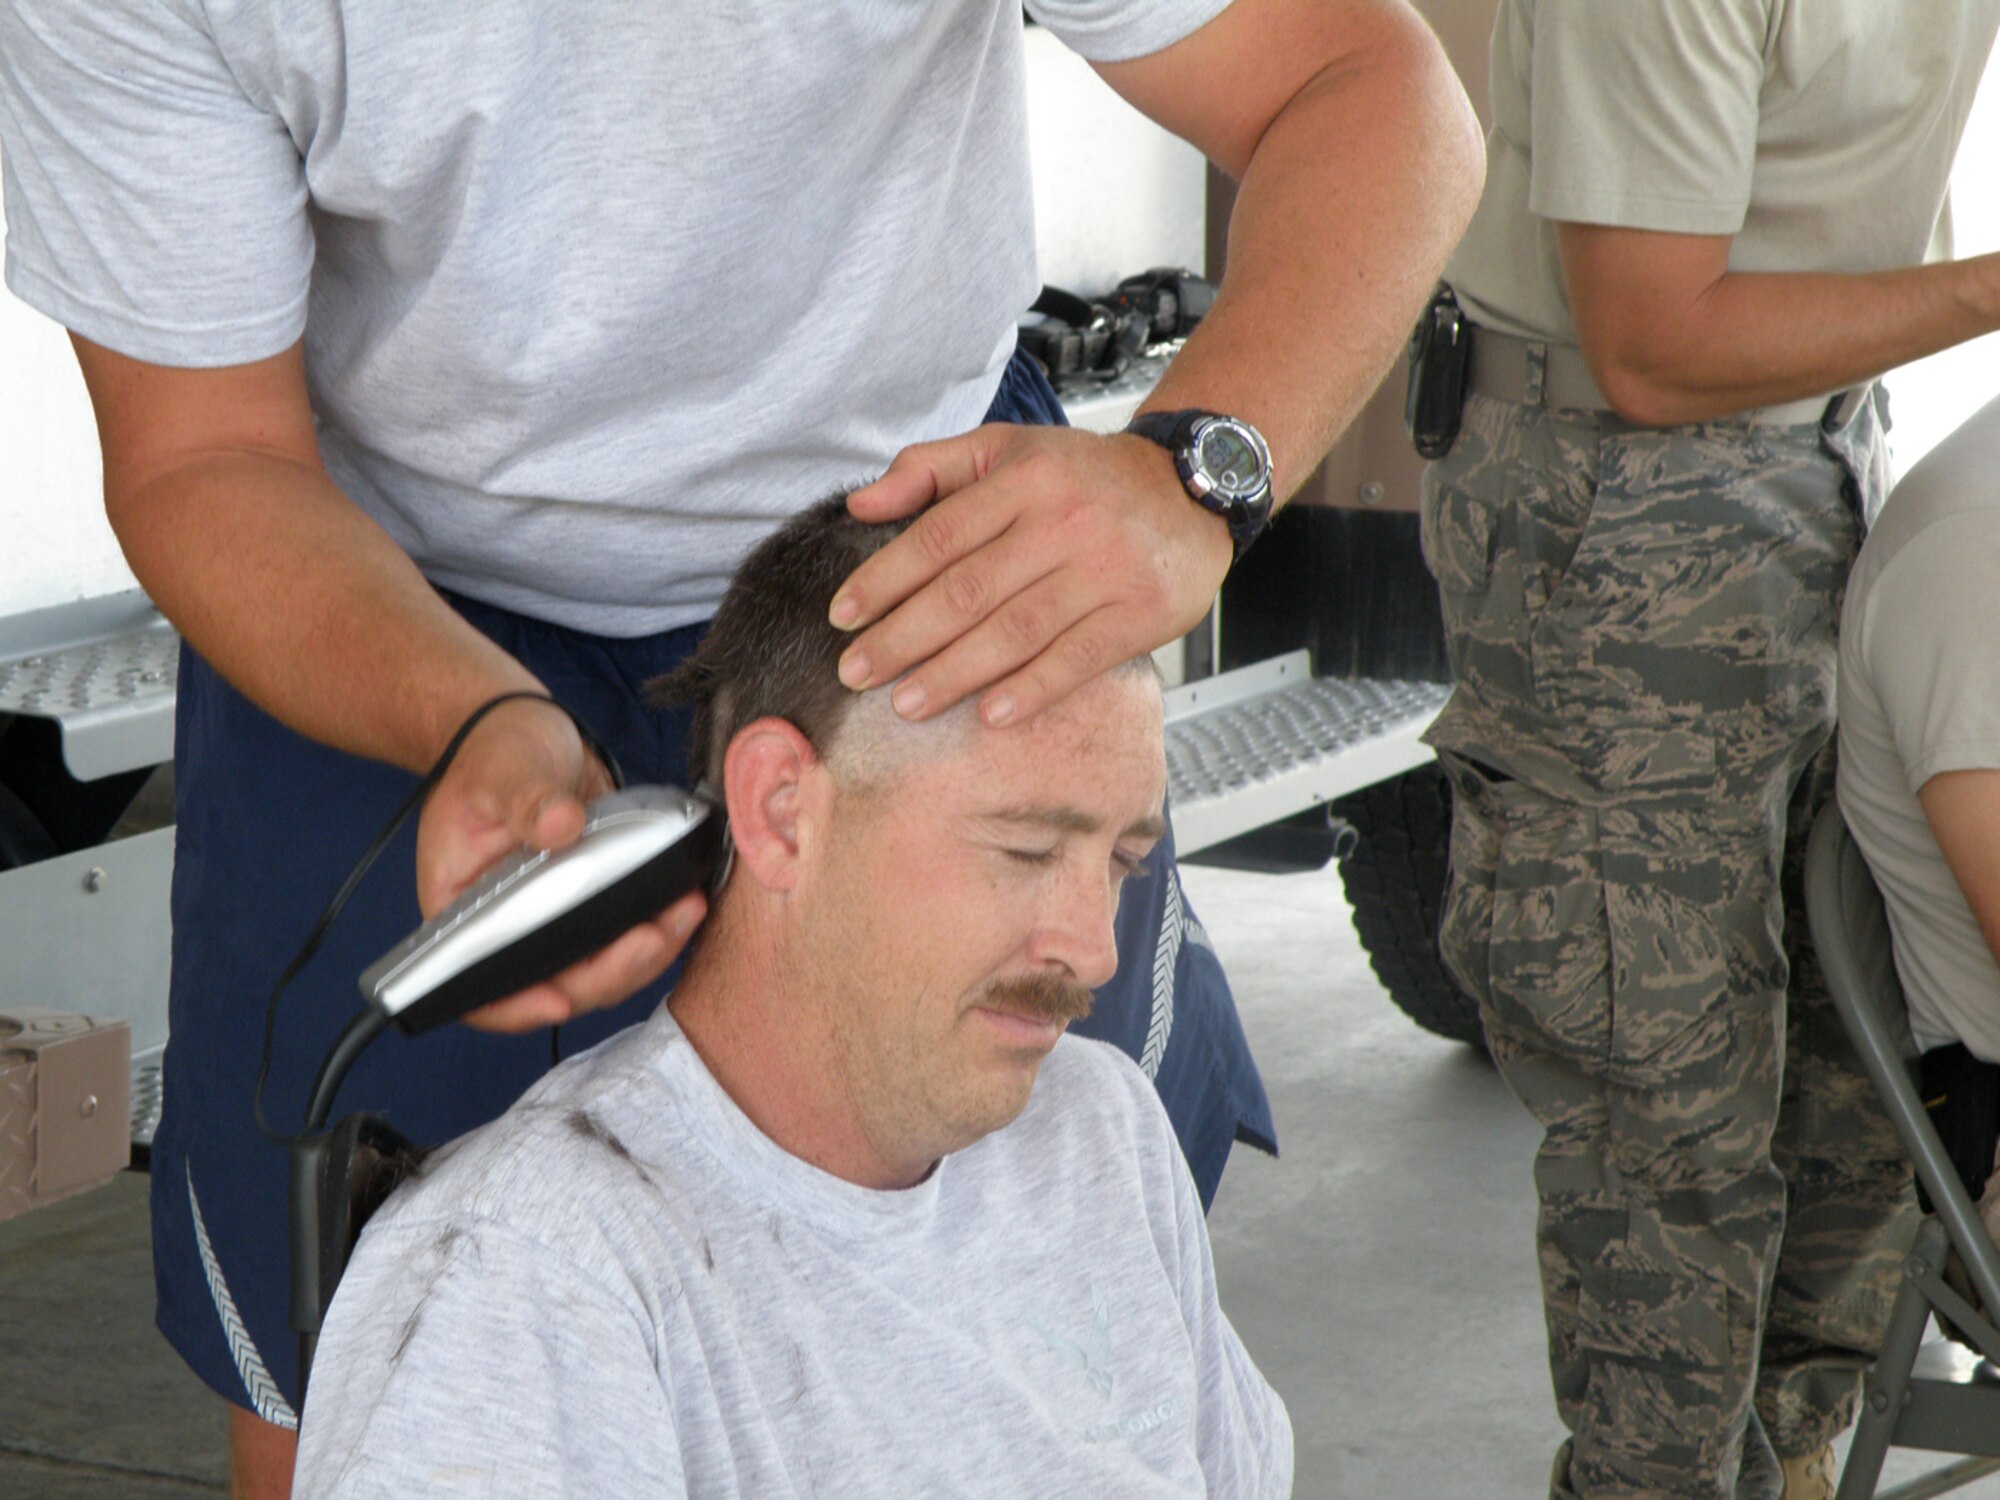 SOUTHWEST ASIA -- Col. Marcia Meeks-Eure, 386th Mission Support Group commander, prepares to cut the hair off Staff Sgt. Matt Tumelson, 386th Expeditionary Civil Engineer Squadron during the fundraising event “Operation Baldy Bash” Oct. 11 at a base in Southwest Asia. The fundraiser, which raised more than $500, will go towards education, training and awareness programs for families that have children with disabilities. 